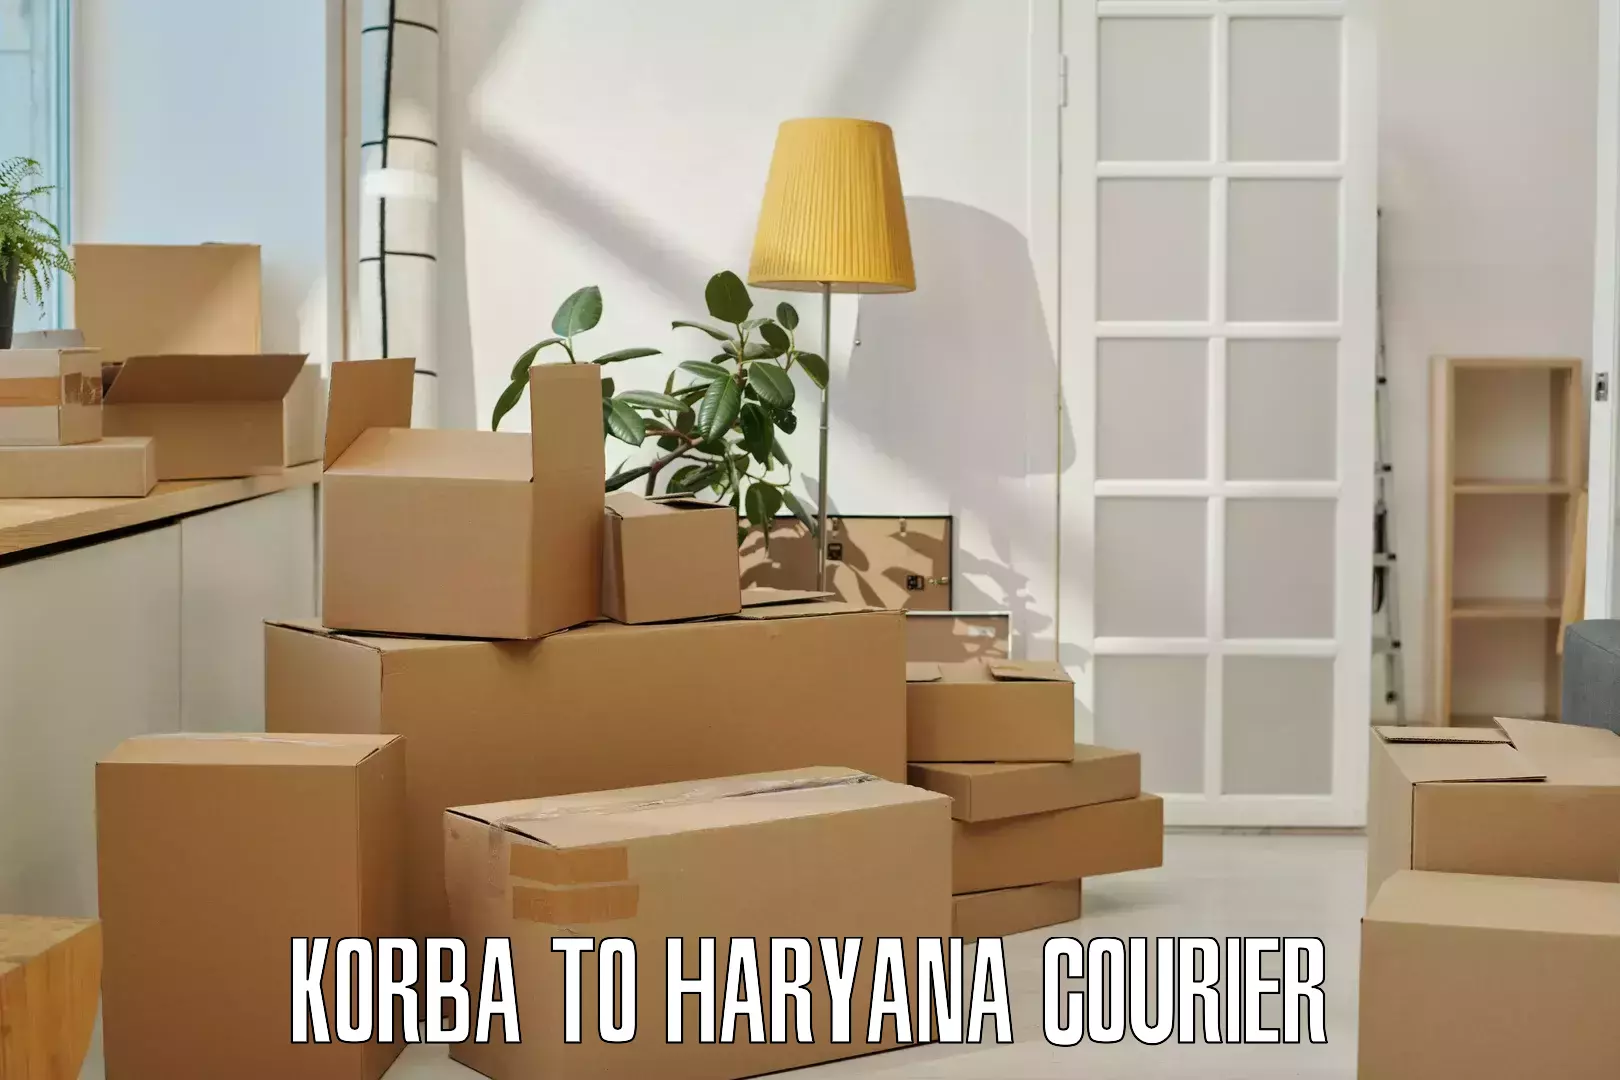 Global courier networks Korba to Fatehabad